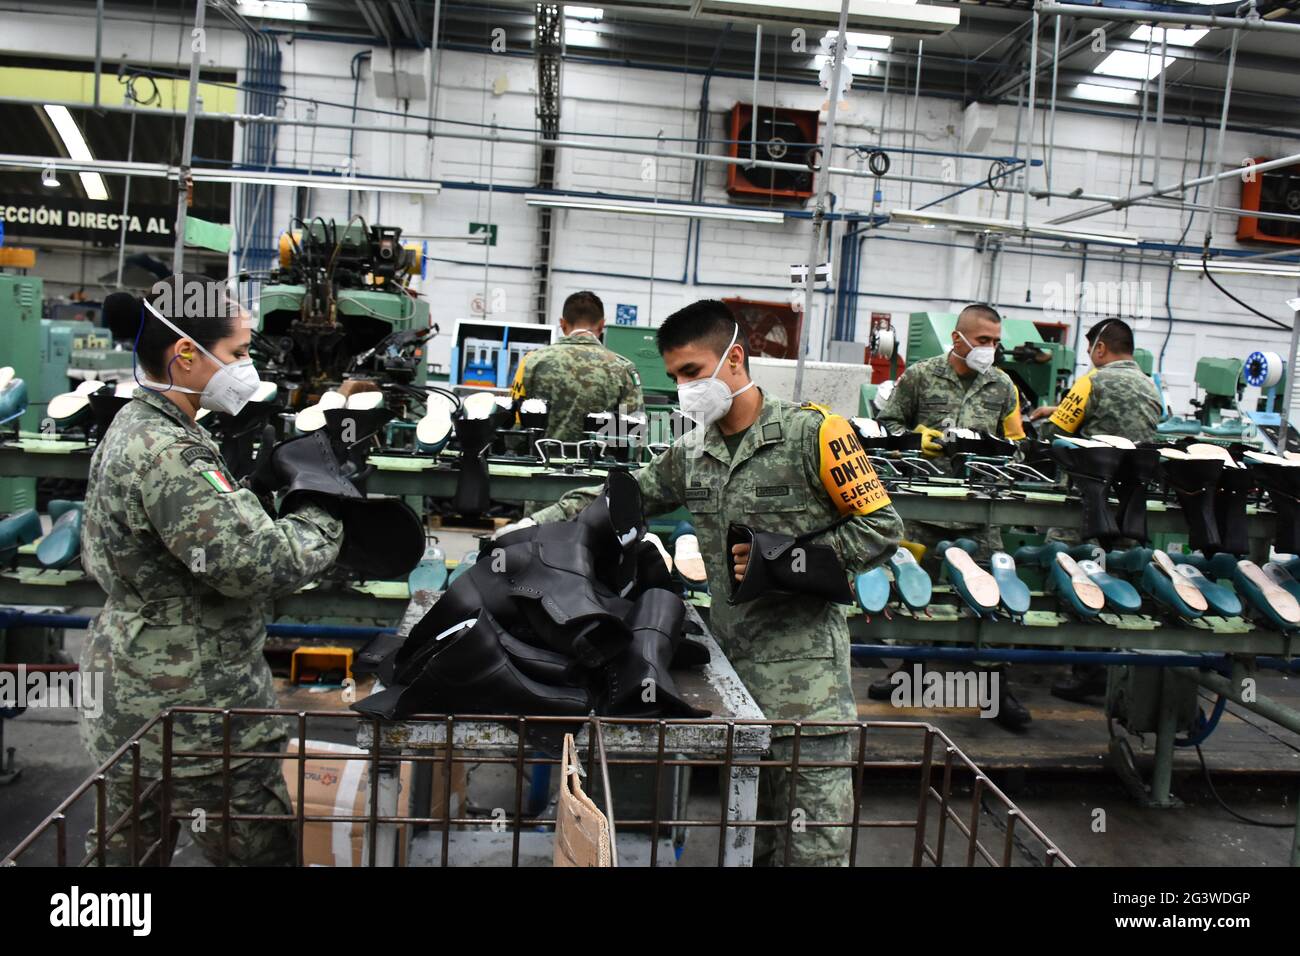 Non Exclusive: MEXICO CITY, MEXICO - JUNE 16: A military is seen during the  production process of of Mexican Army boots at the Factory of Military  Stock Photo - Alamy